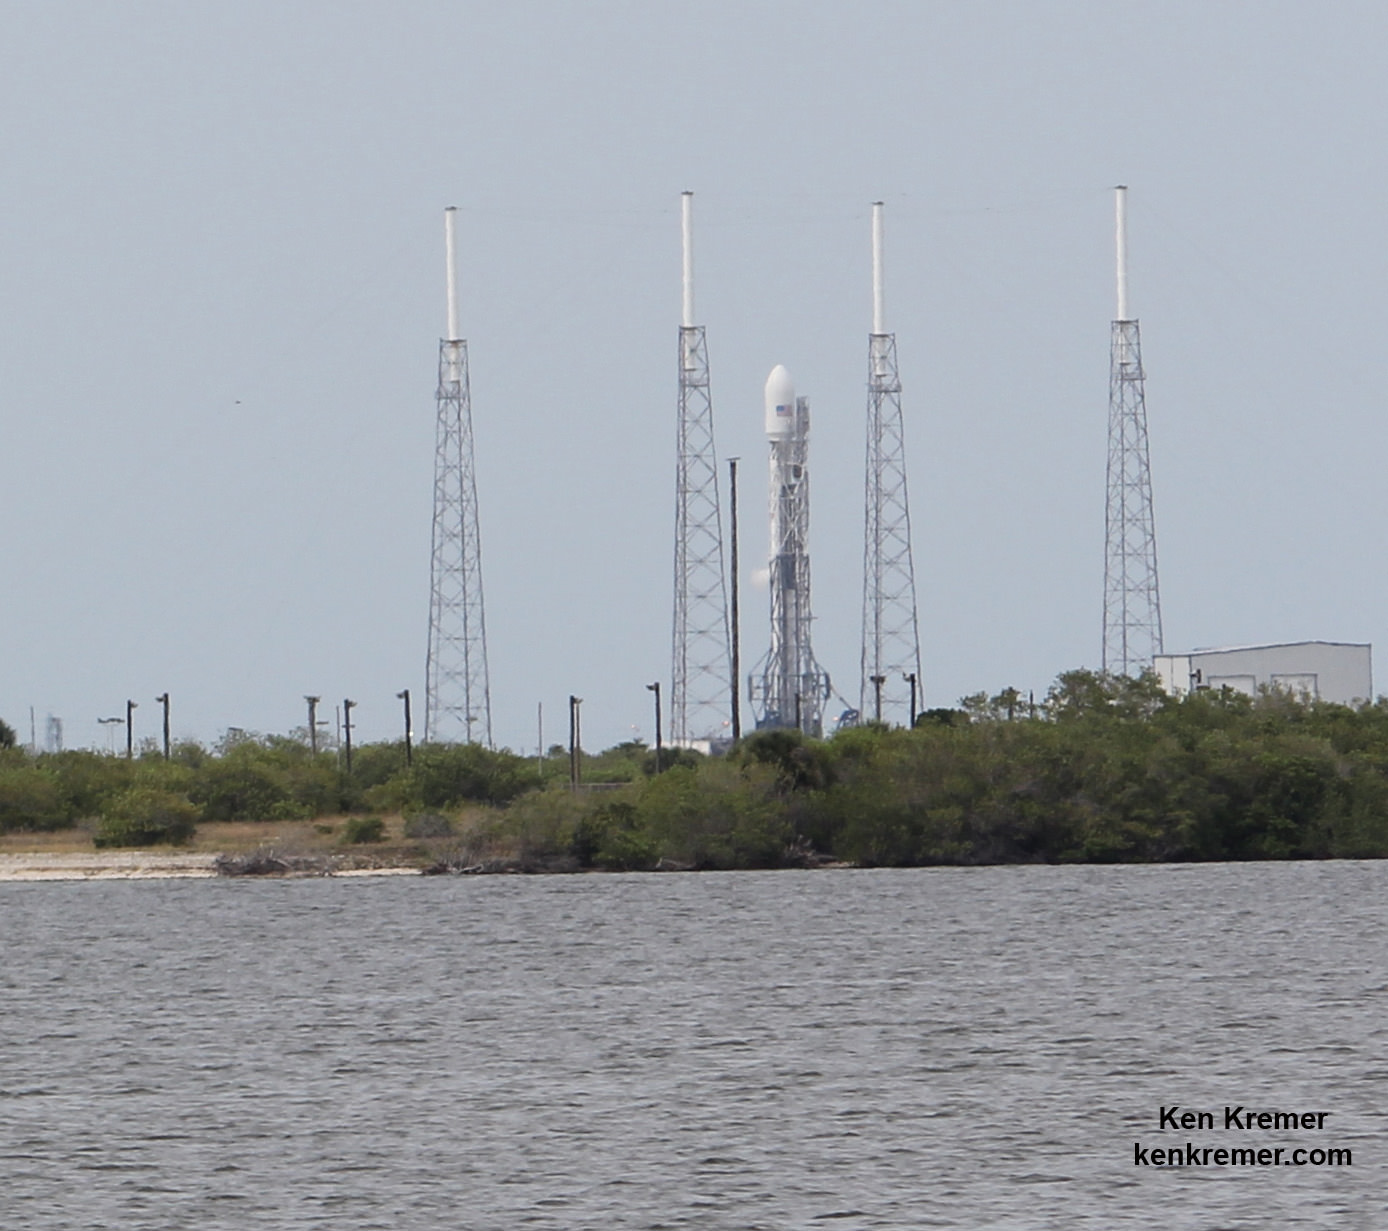 SpaceX Falcon 9 rocket after successful static hot-fire test on June 13 on Pad 40 at Cape Canaveral, FL.  Launch is slated for Friday, June 20, 2014  on ORBCOMM OG2 mission with six OG2 satellites. Credit: Ken Kremer/kenkremer.com